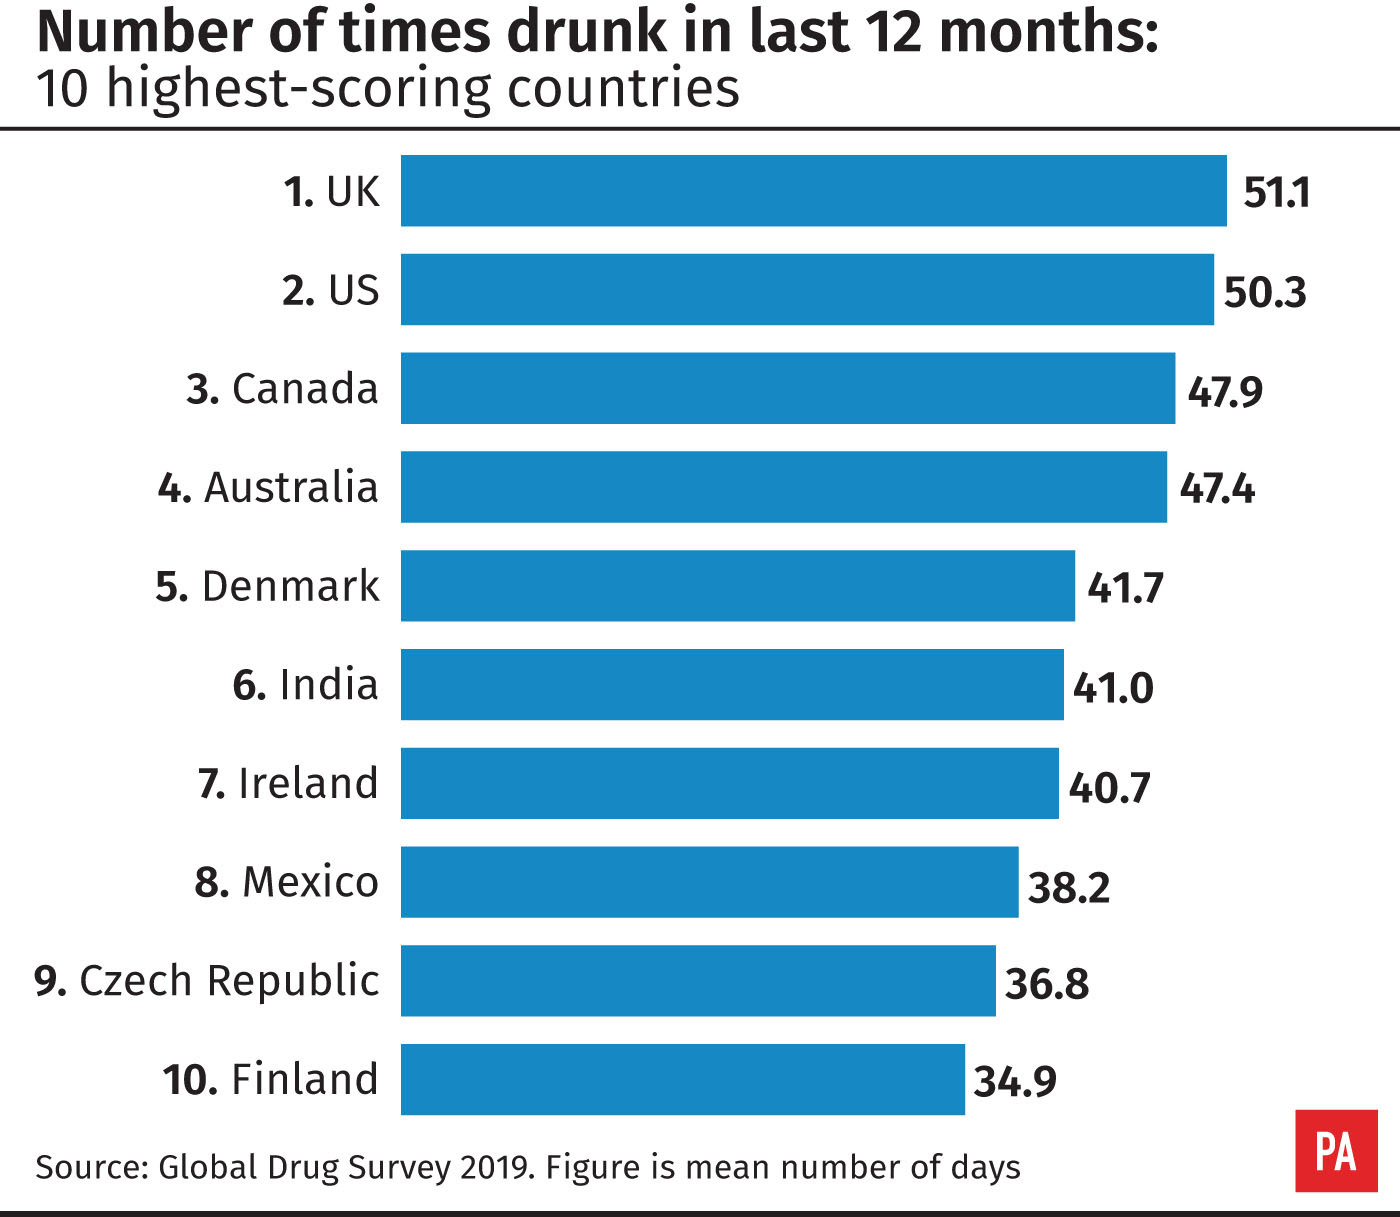 Number of times drunk in last 12 months: 10 highest scoring countries